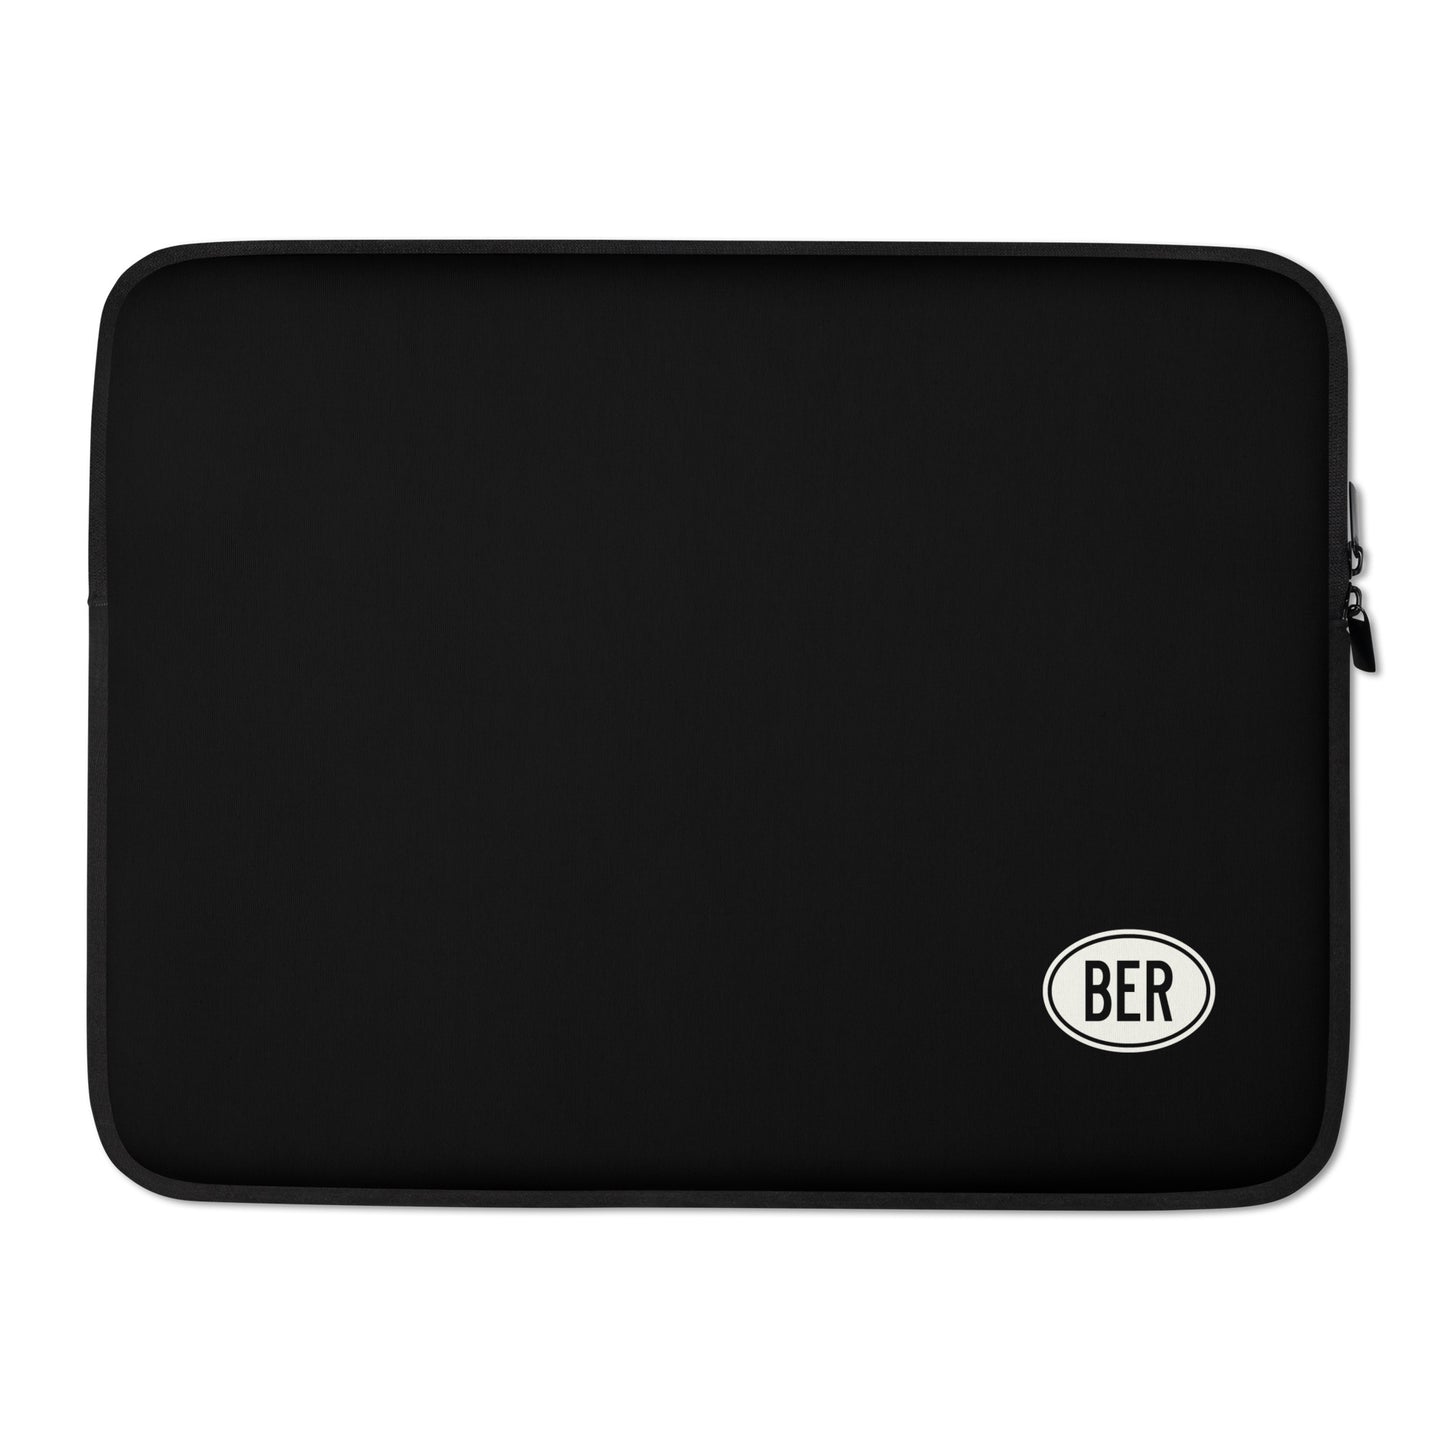 Unique Travel Gift Laptop Sleeve - White Oval • BER Berlin • YHM Designs - Image 02